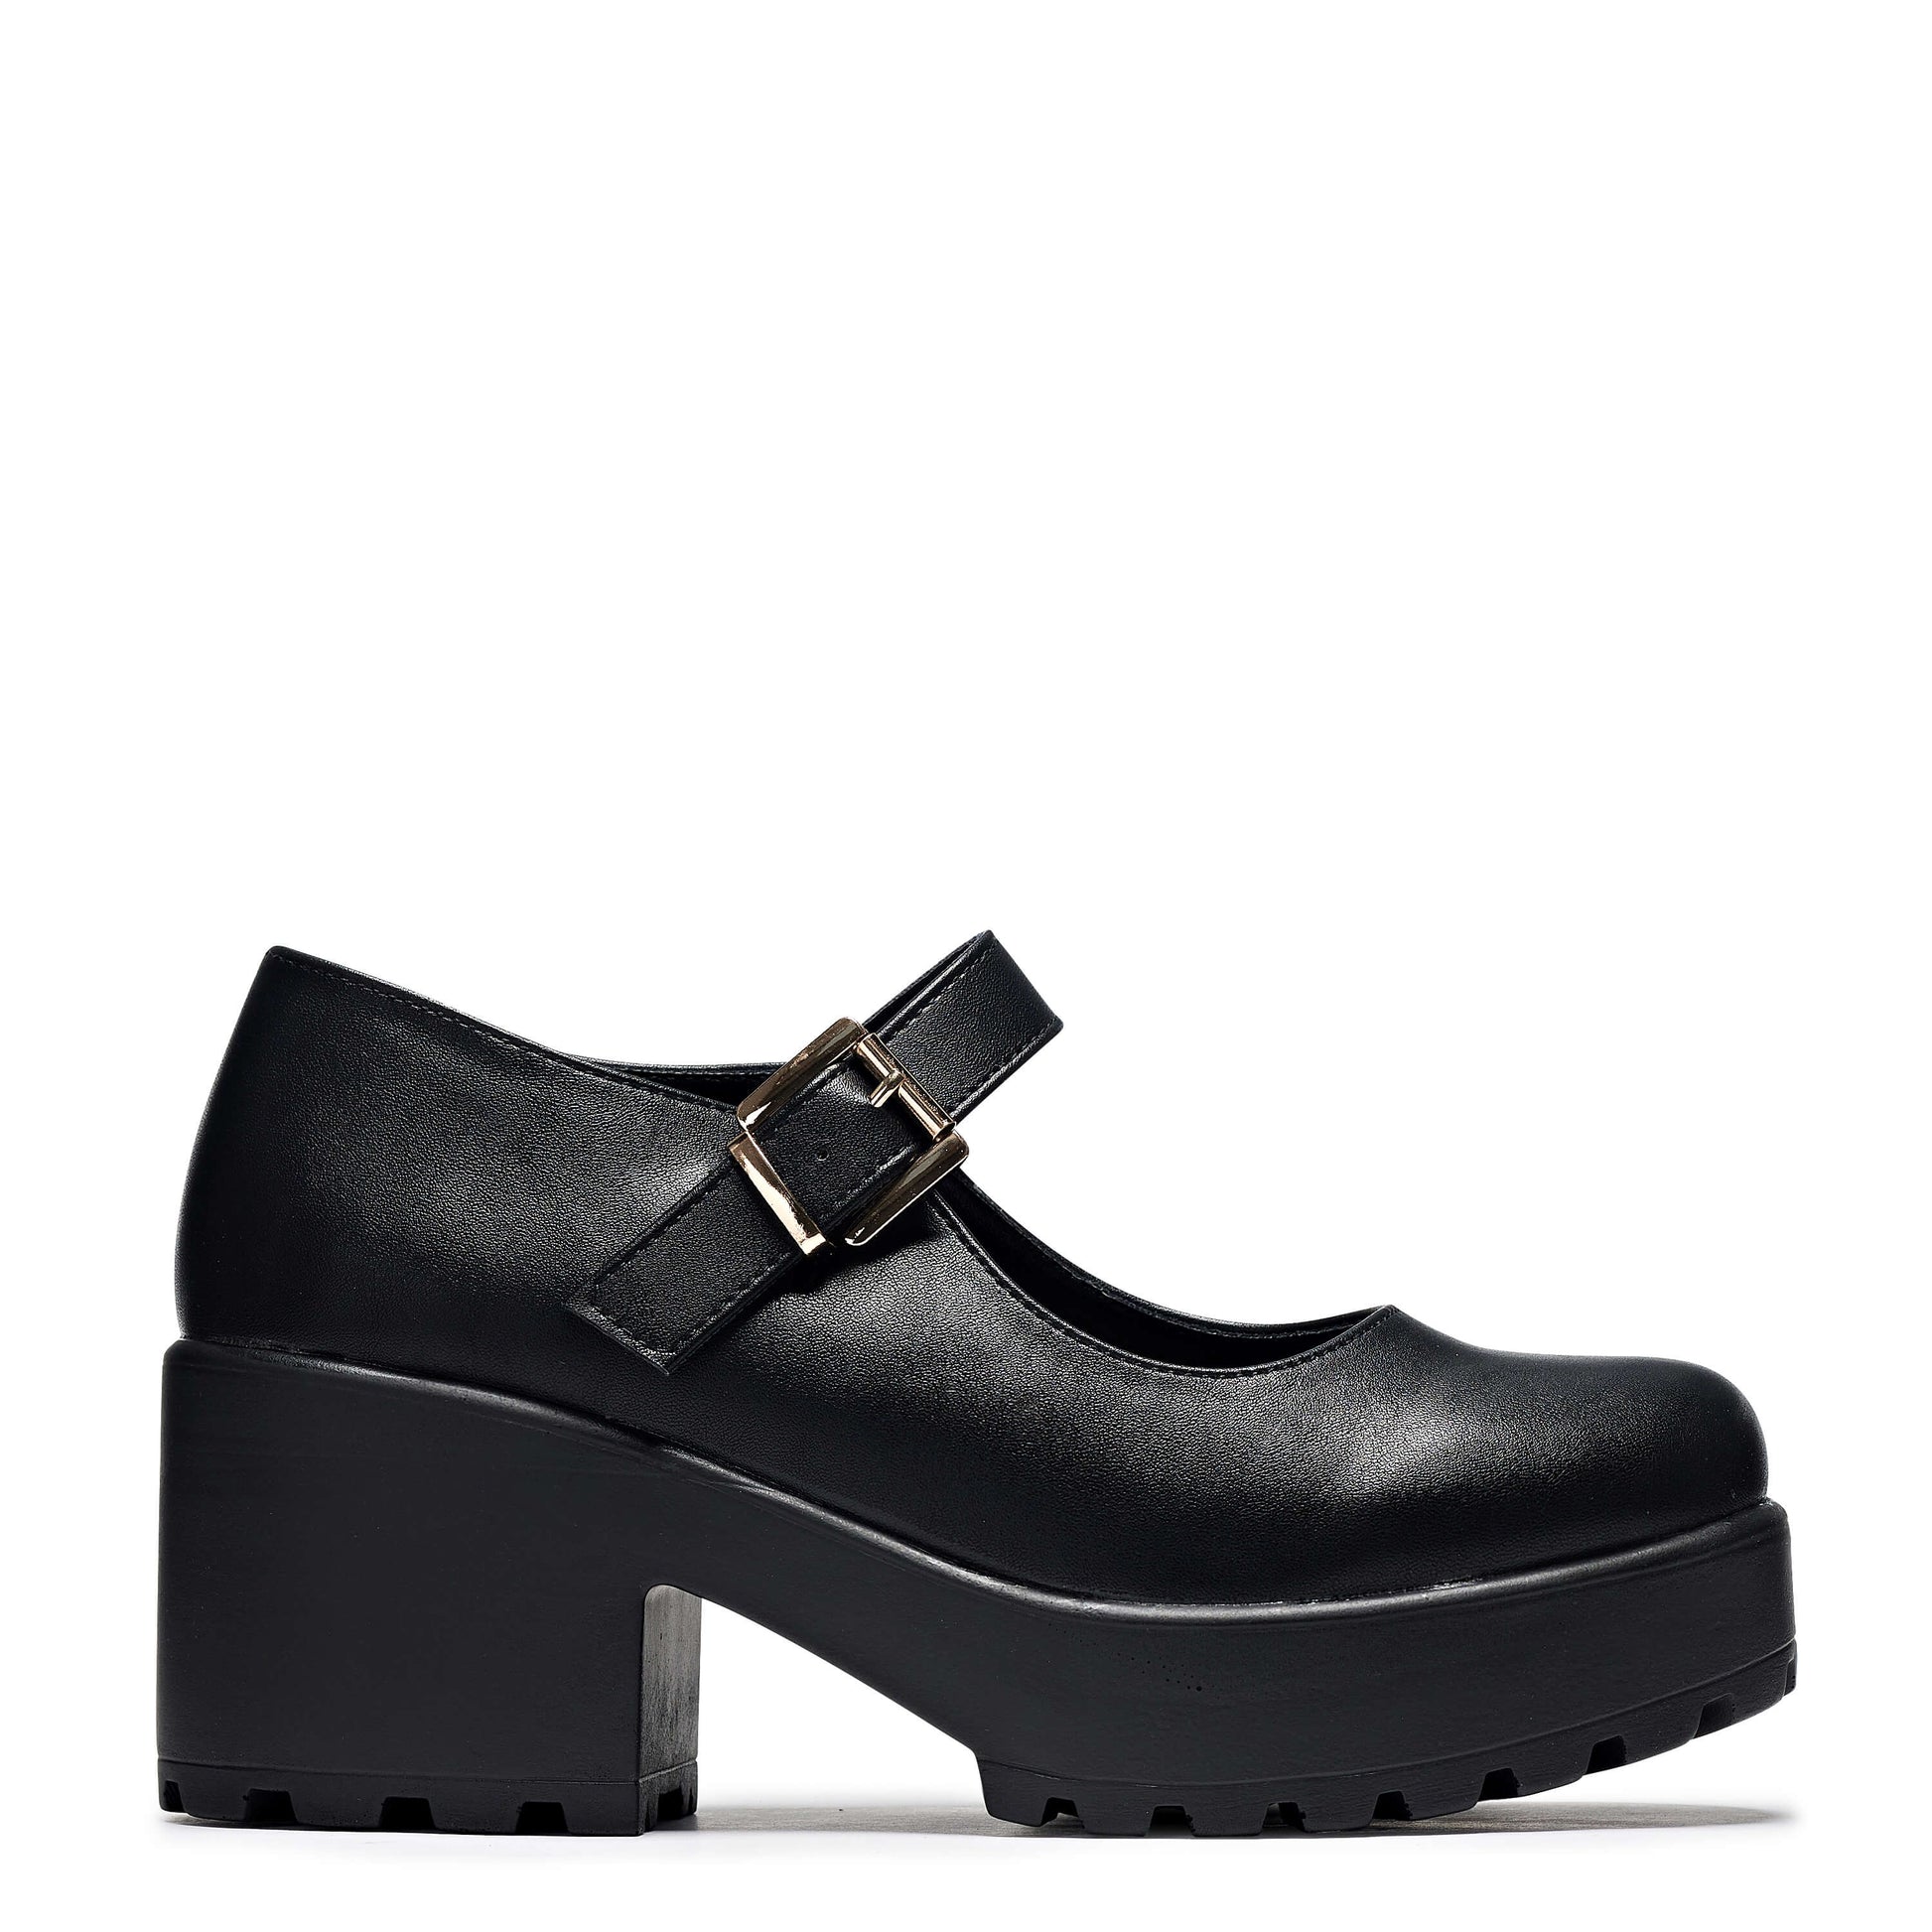 Tira Mary Jane Shoes 'Faux Leather Edition' - Mary Janes - KOI Footwear - Black - Side View